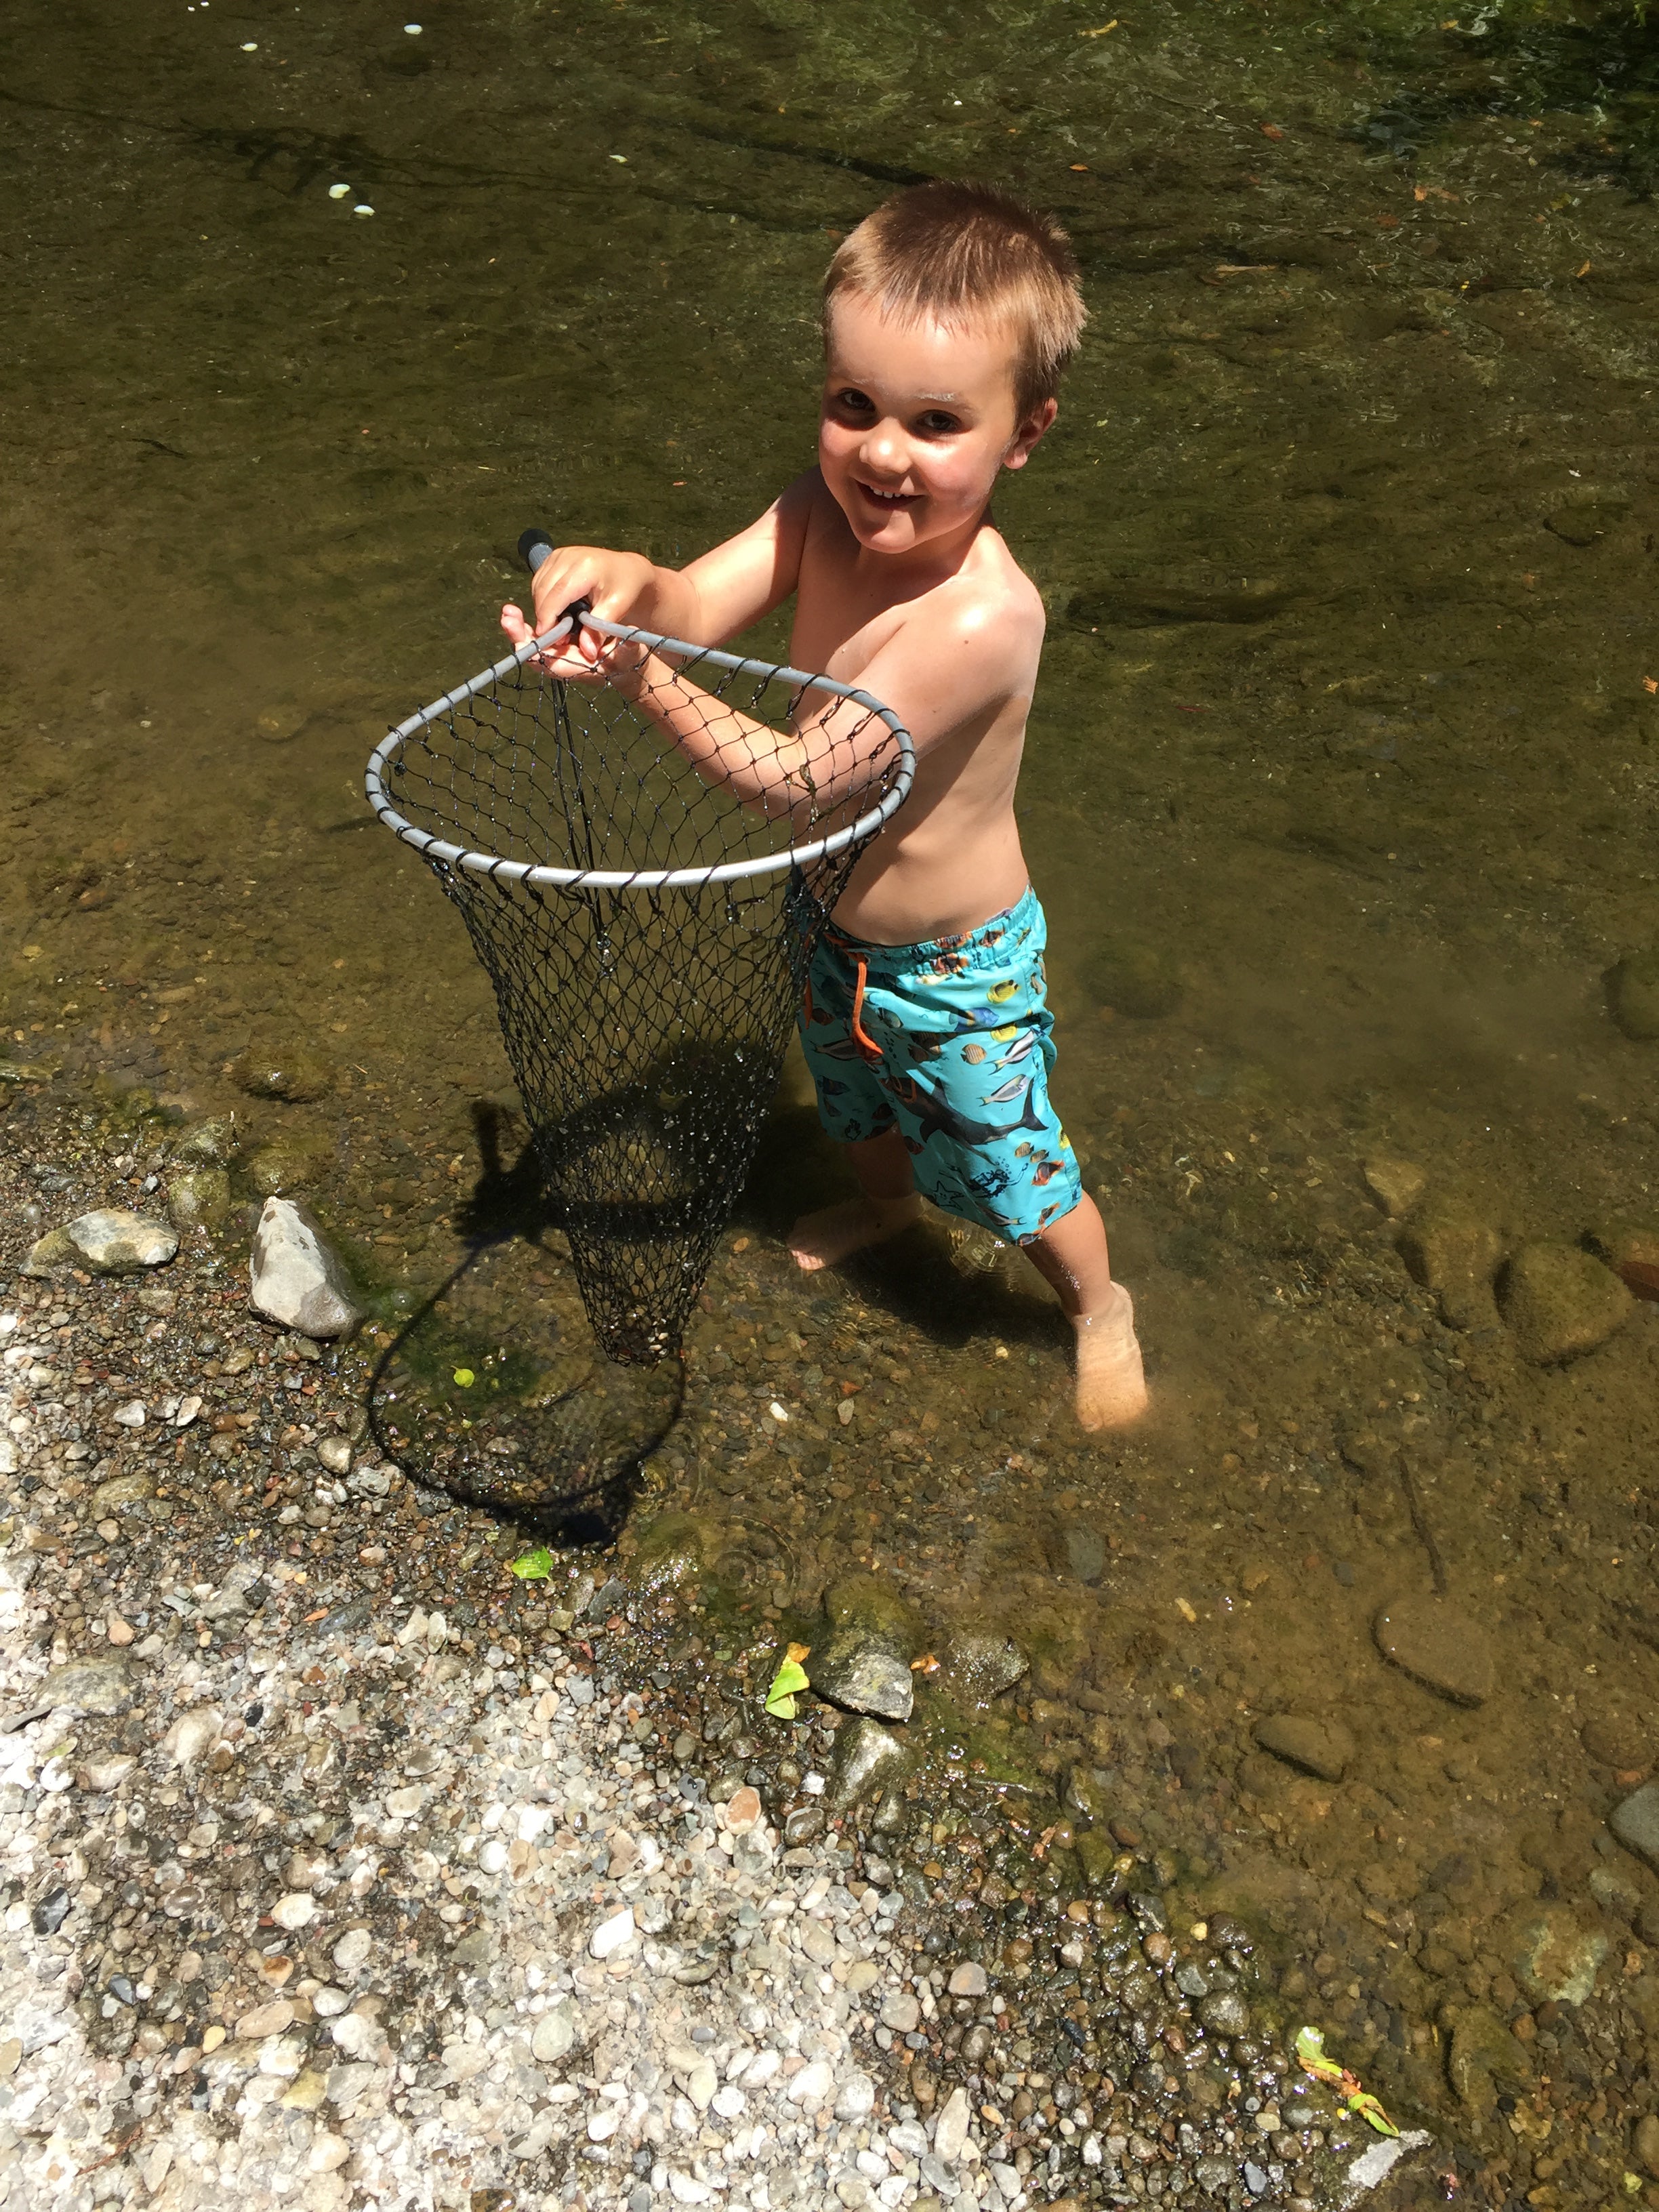 Catching fish and crawdads in Austin Creek across the street from campsite